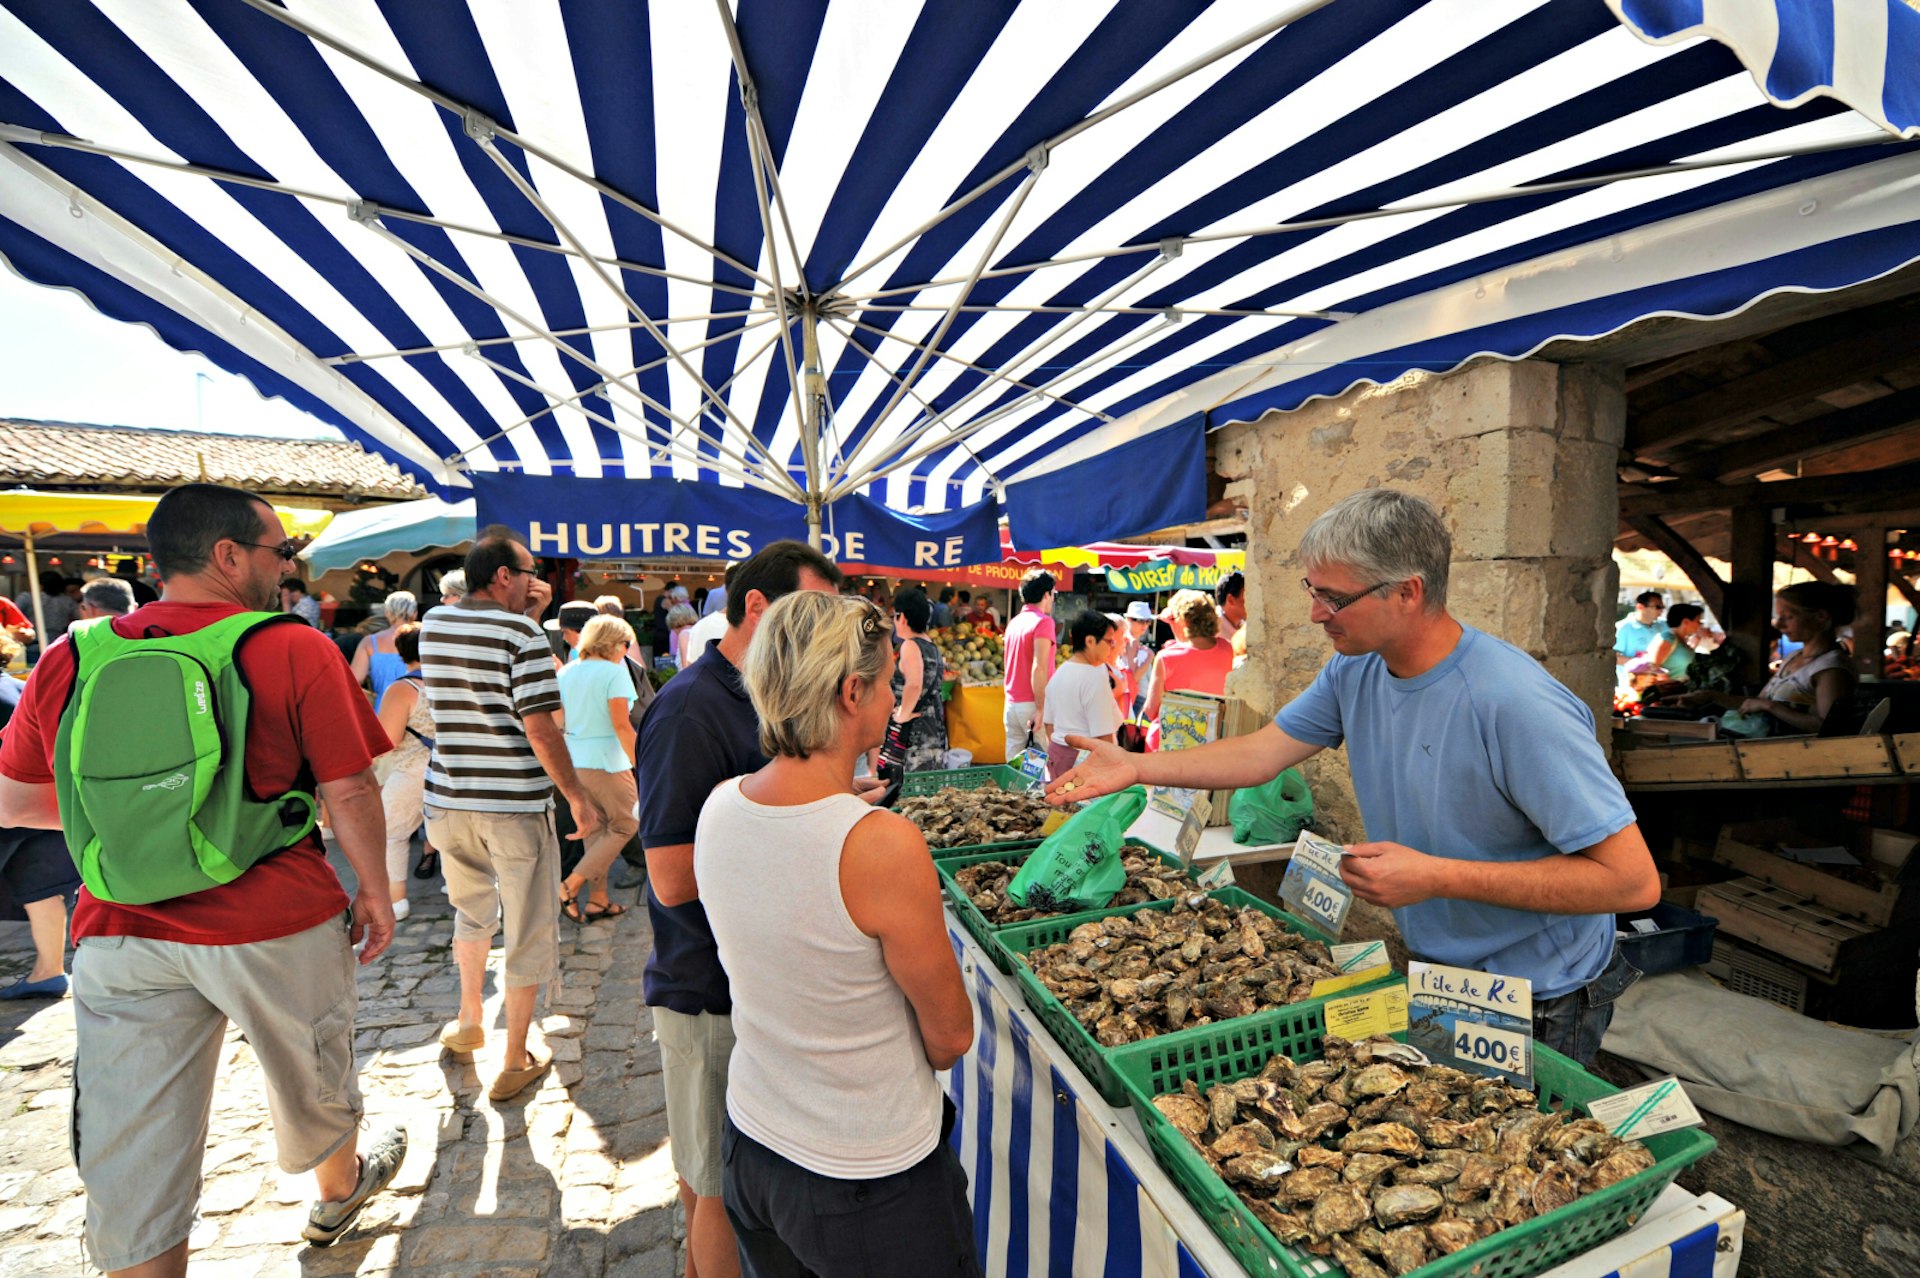 An oyster seller talks with a customer at La Flotte-en-Re market; there is a large blue and white striped awning overhead and other shoppers walk past over the cobbled marketplace.